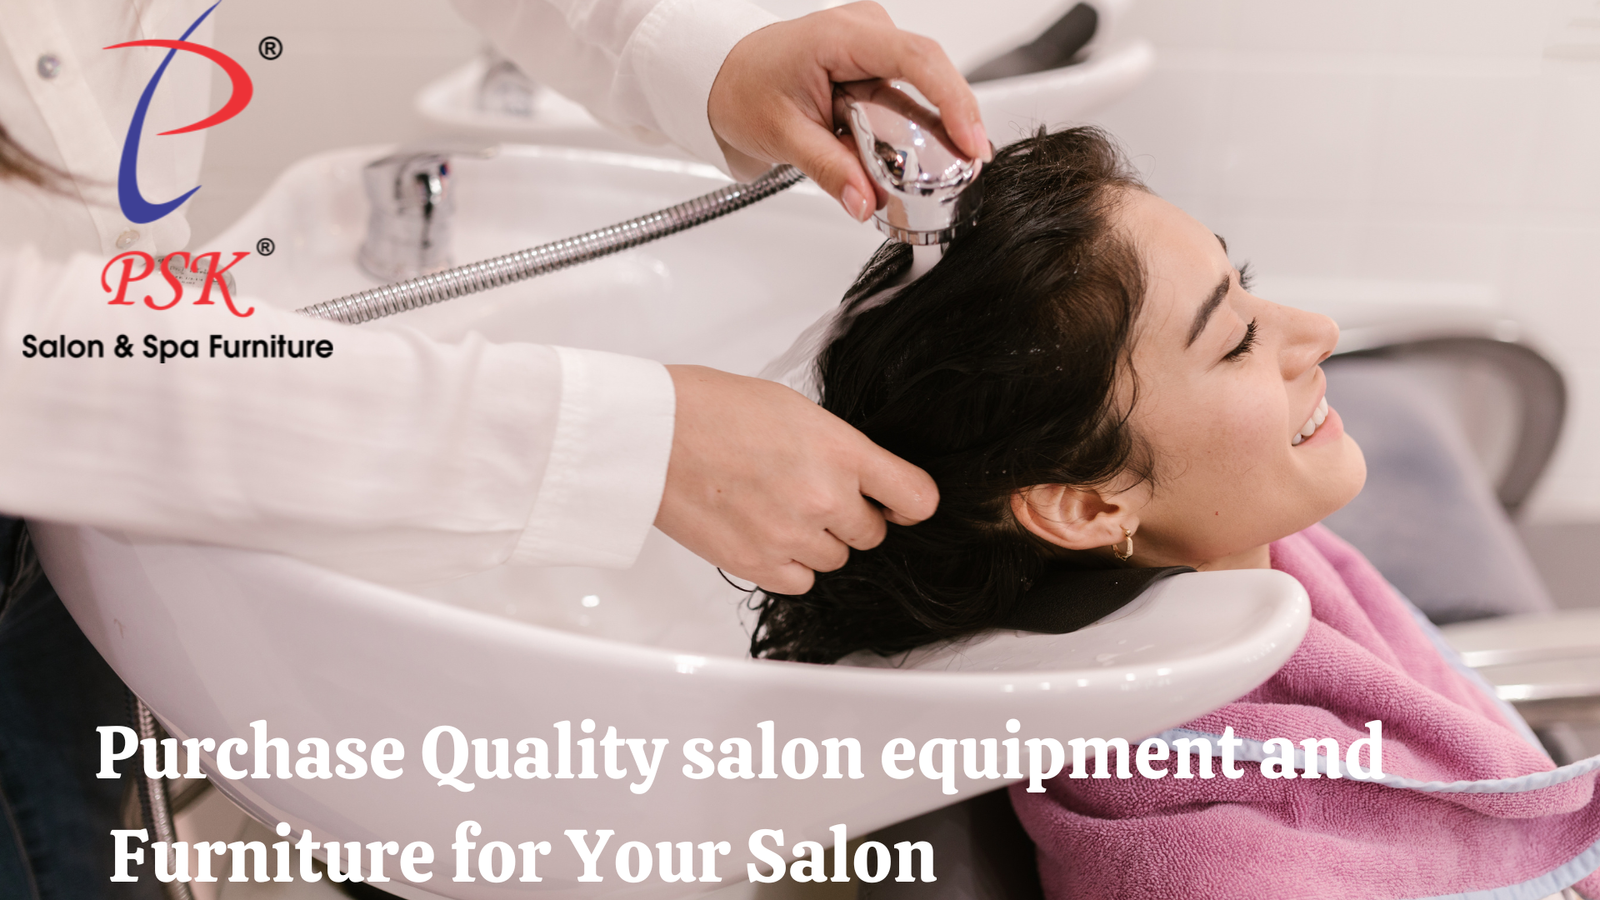 You are currently viewing Purchase Quality salon equipment and Furniture for Your Salon